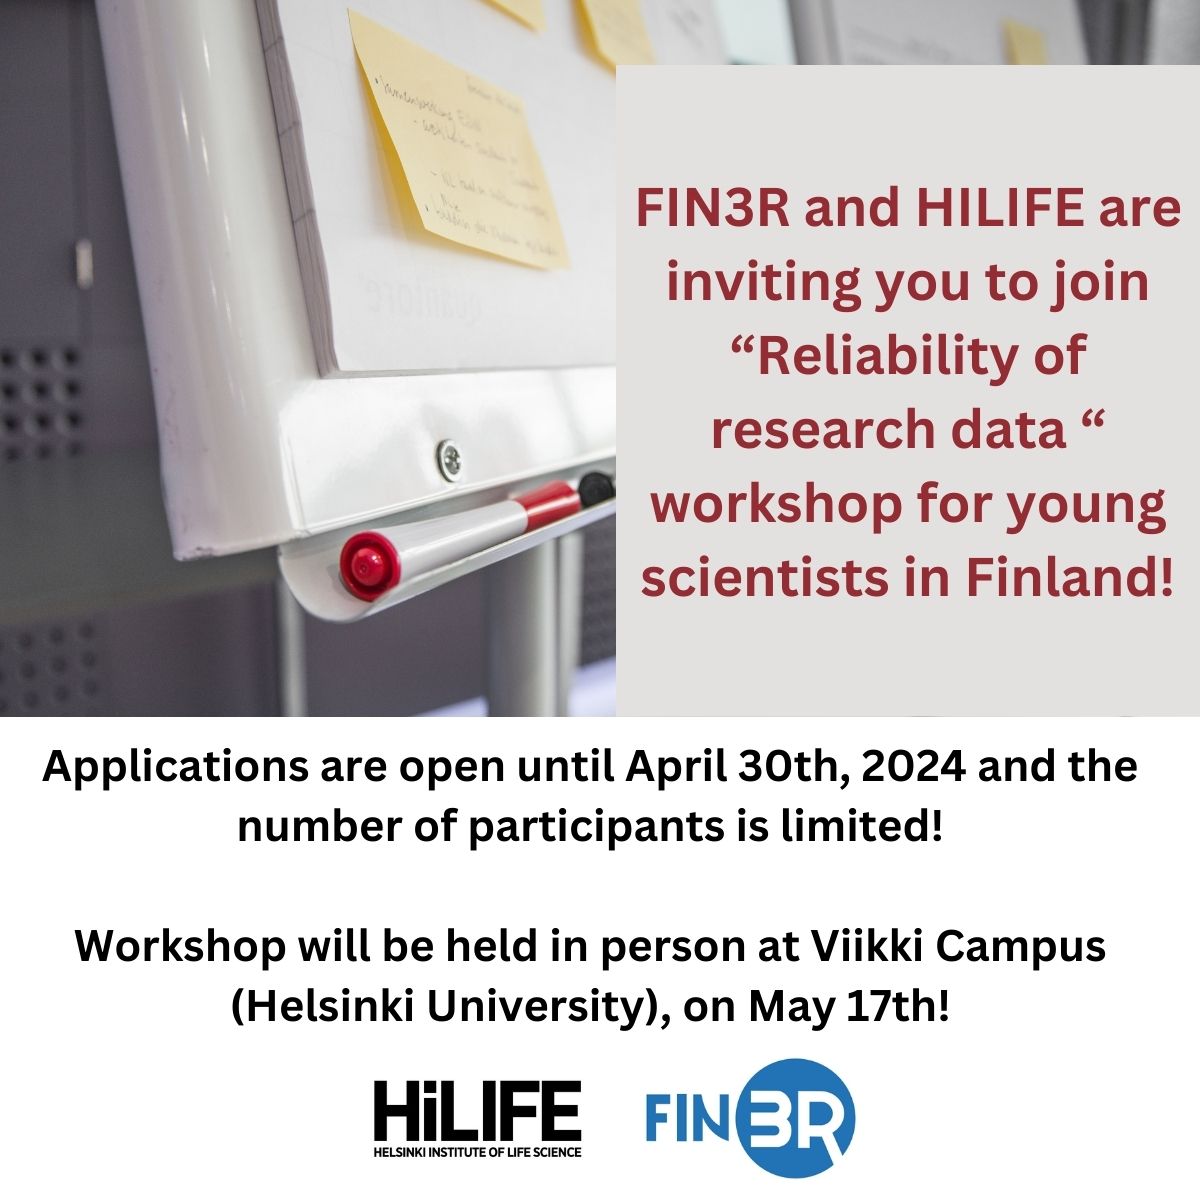 Reliability of research data #workshop by #FIN3R and @HiLIFE_helsinki for young researchers in 🇫🇮 Apply by April 30th, 2024! Hurry up to save your space, limited number of participants will be accepted! 🔗 More info: fin3r.fi/en/news 🗓️17.5. @helsinkiuni #3Rs #research